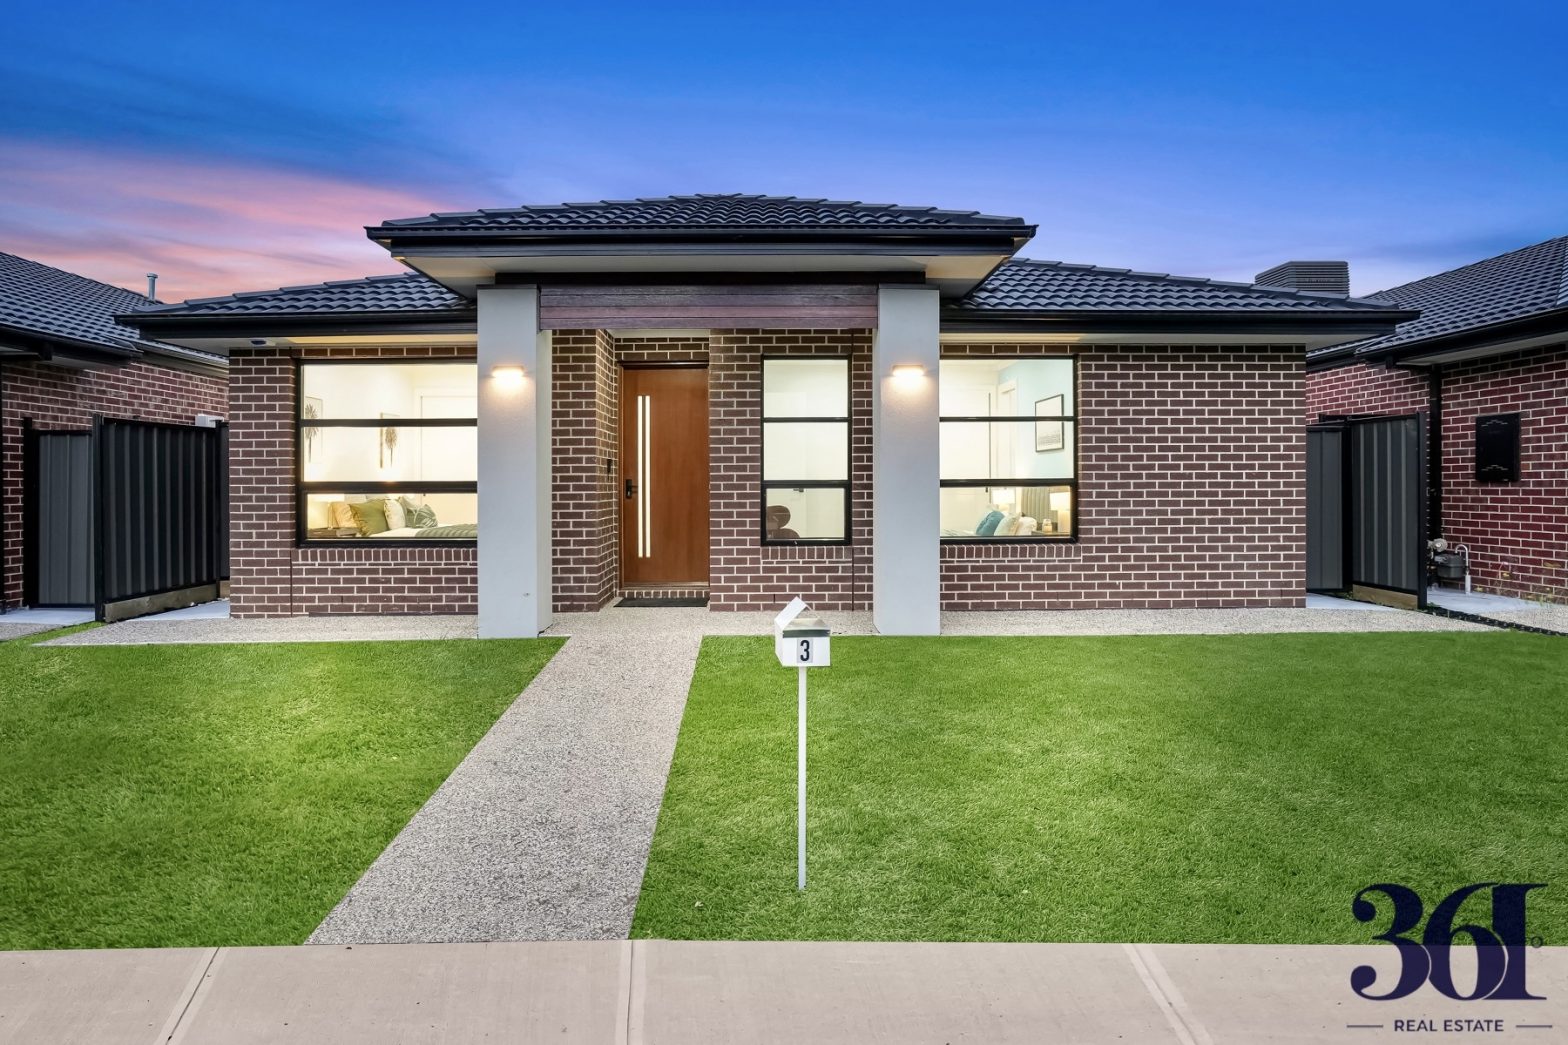 BRAND NEW SPECTACULAR 4 BEDROOM ABODE WITH GREAT LOCATION & UPGRADES IN BELLA ROSA ESTATE. WERRIBEE!!!